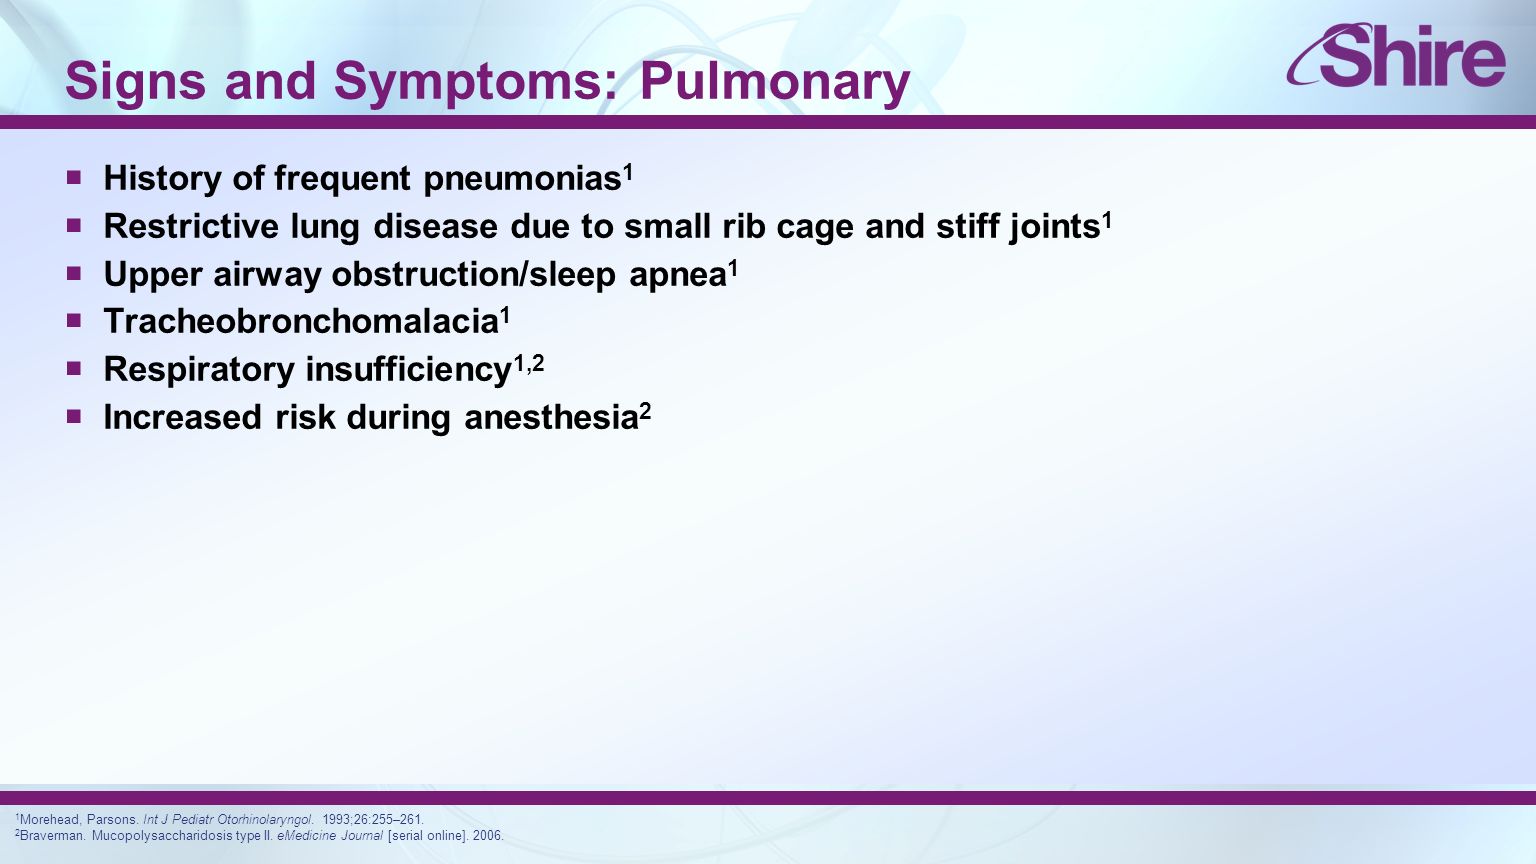 Signs and Symptoms: Pulmonary  History of frequent pneumonias 1  Restrictive lung disease due to small rib cage and stiff joints 1  Upper airway obstruction/sleep apnea 1  Tracheobronchomalacia 1  Respiratory insufficiency 1,2  Increased risk during anesthesia 2 1 Morehead, Parsons.